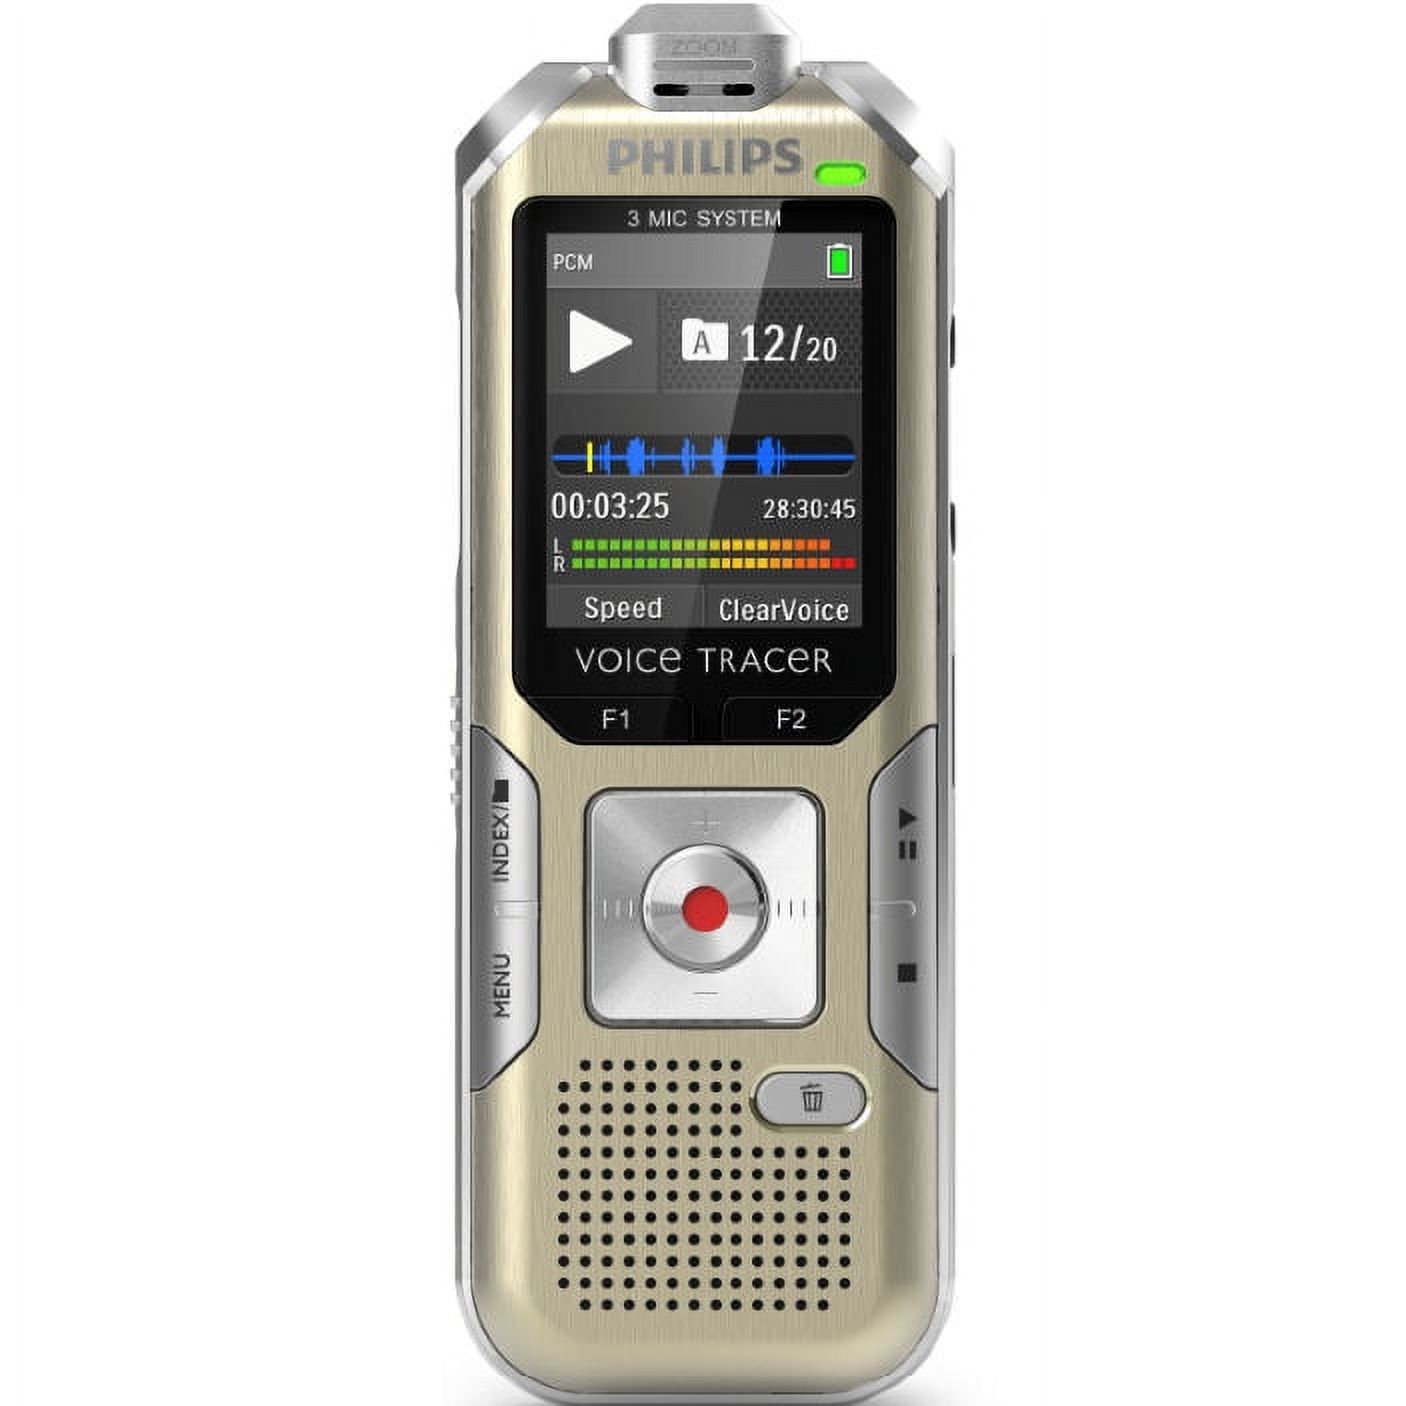 Philips DVT8000 4GB Expandable Digital Voice Recorder with Remote Control, Motion Sensor and Large LCD Color Display - image 1 of 7